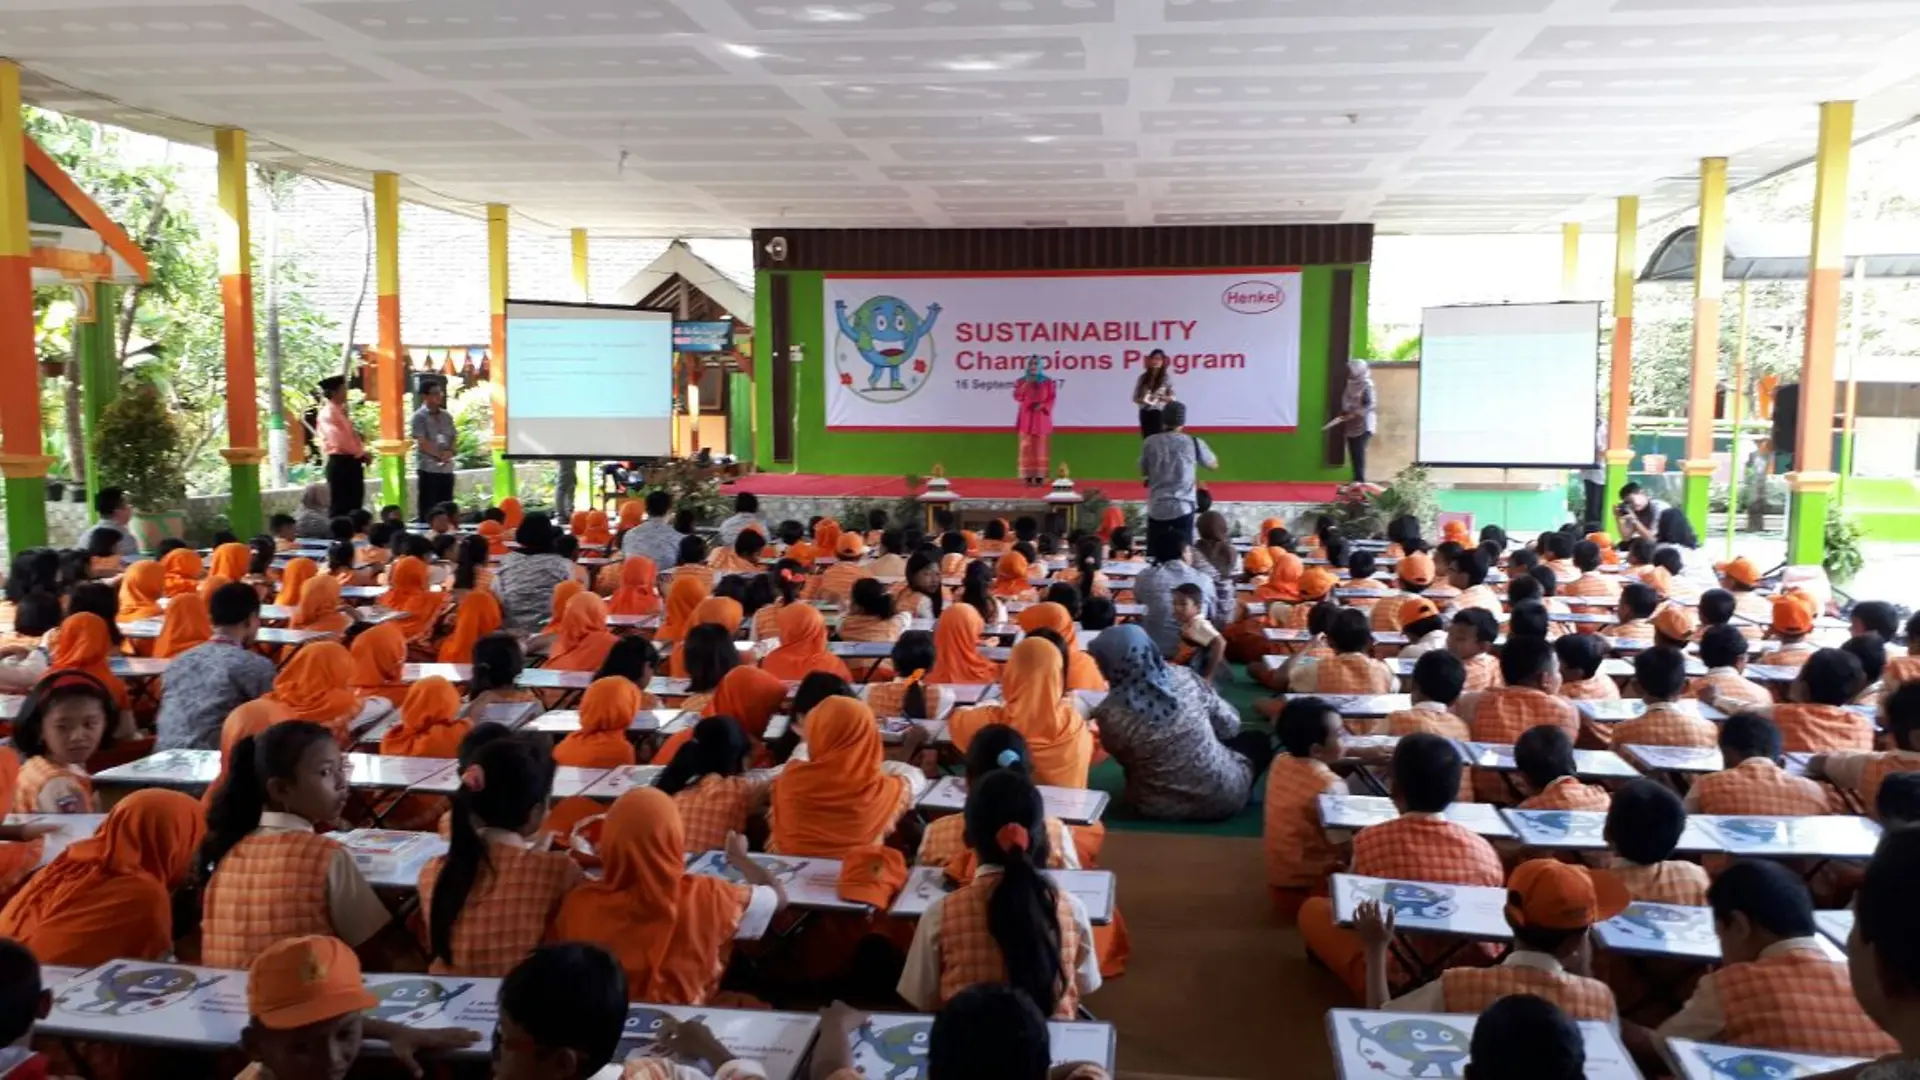 Nearly 250 students from SDN Dermo 1 in Pasuruan learn to conserve the environment through Henkel’s Sustainability Ambassador School Outreach program.